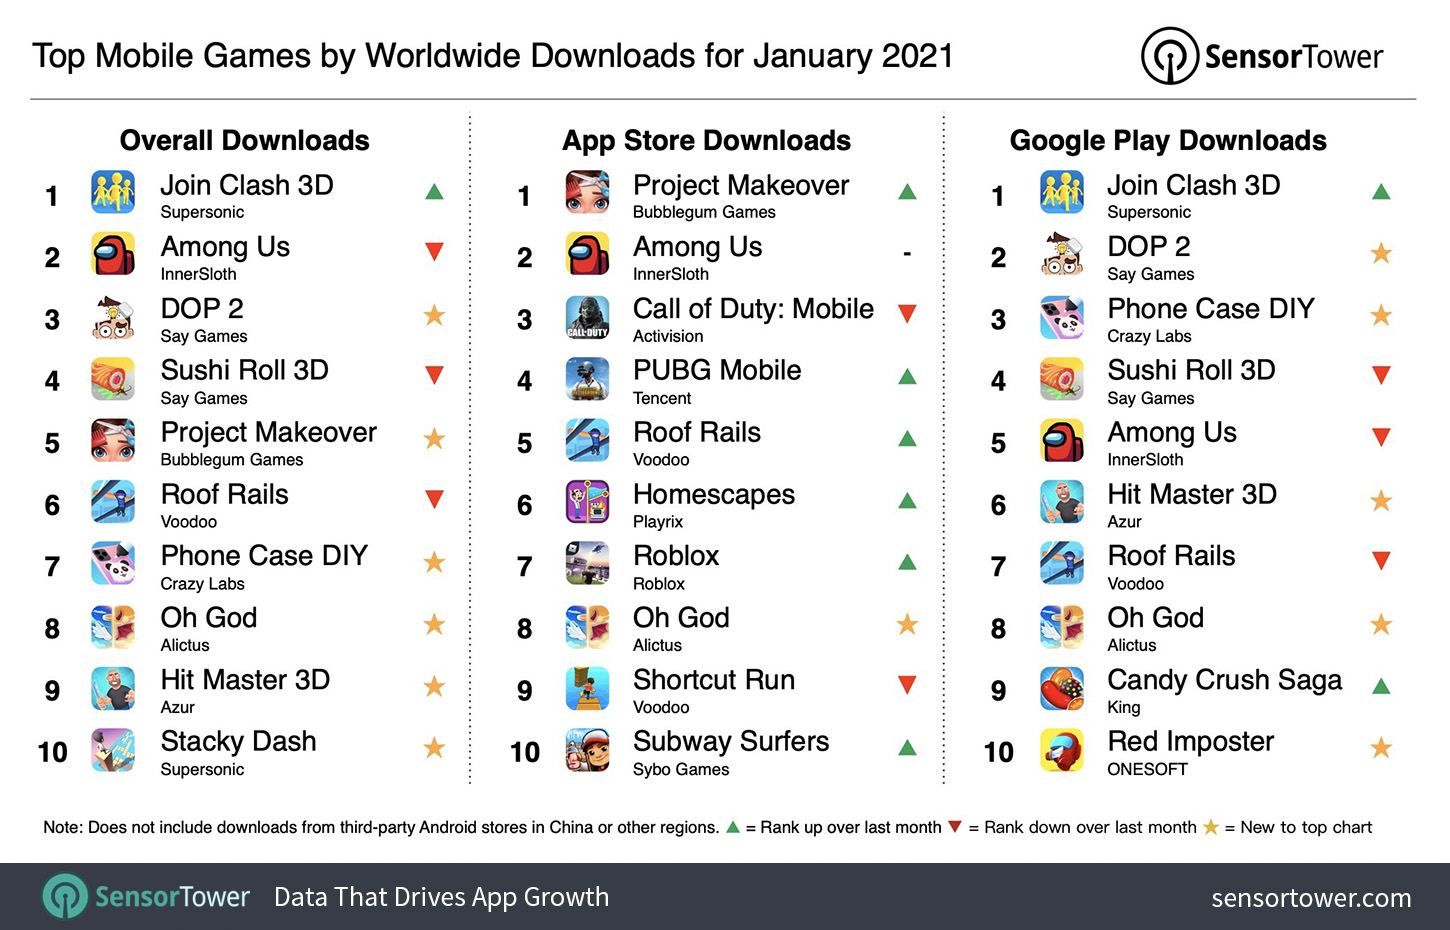 Top Mobile Games Worldwide for January 2021 by Downloads